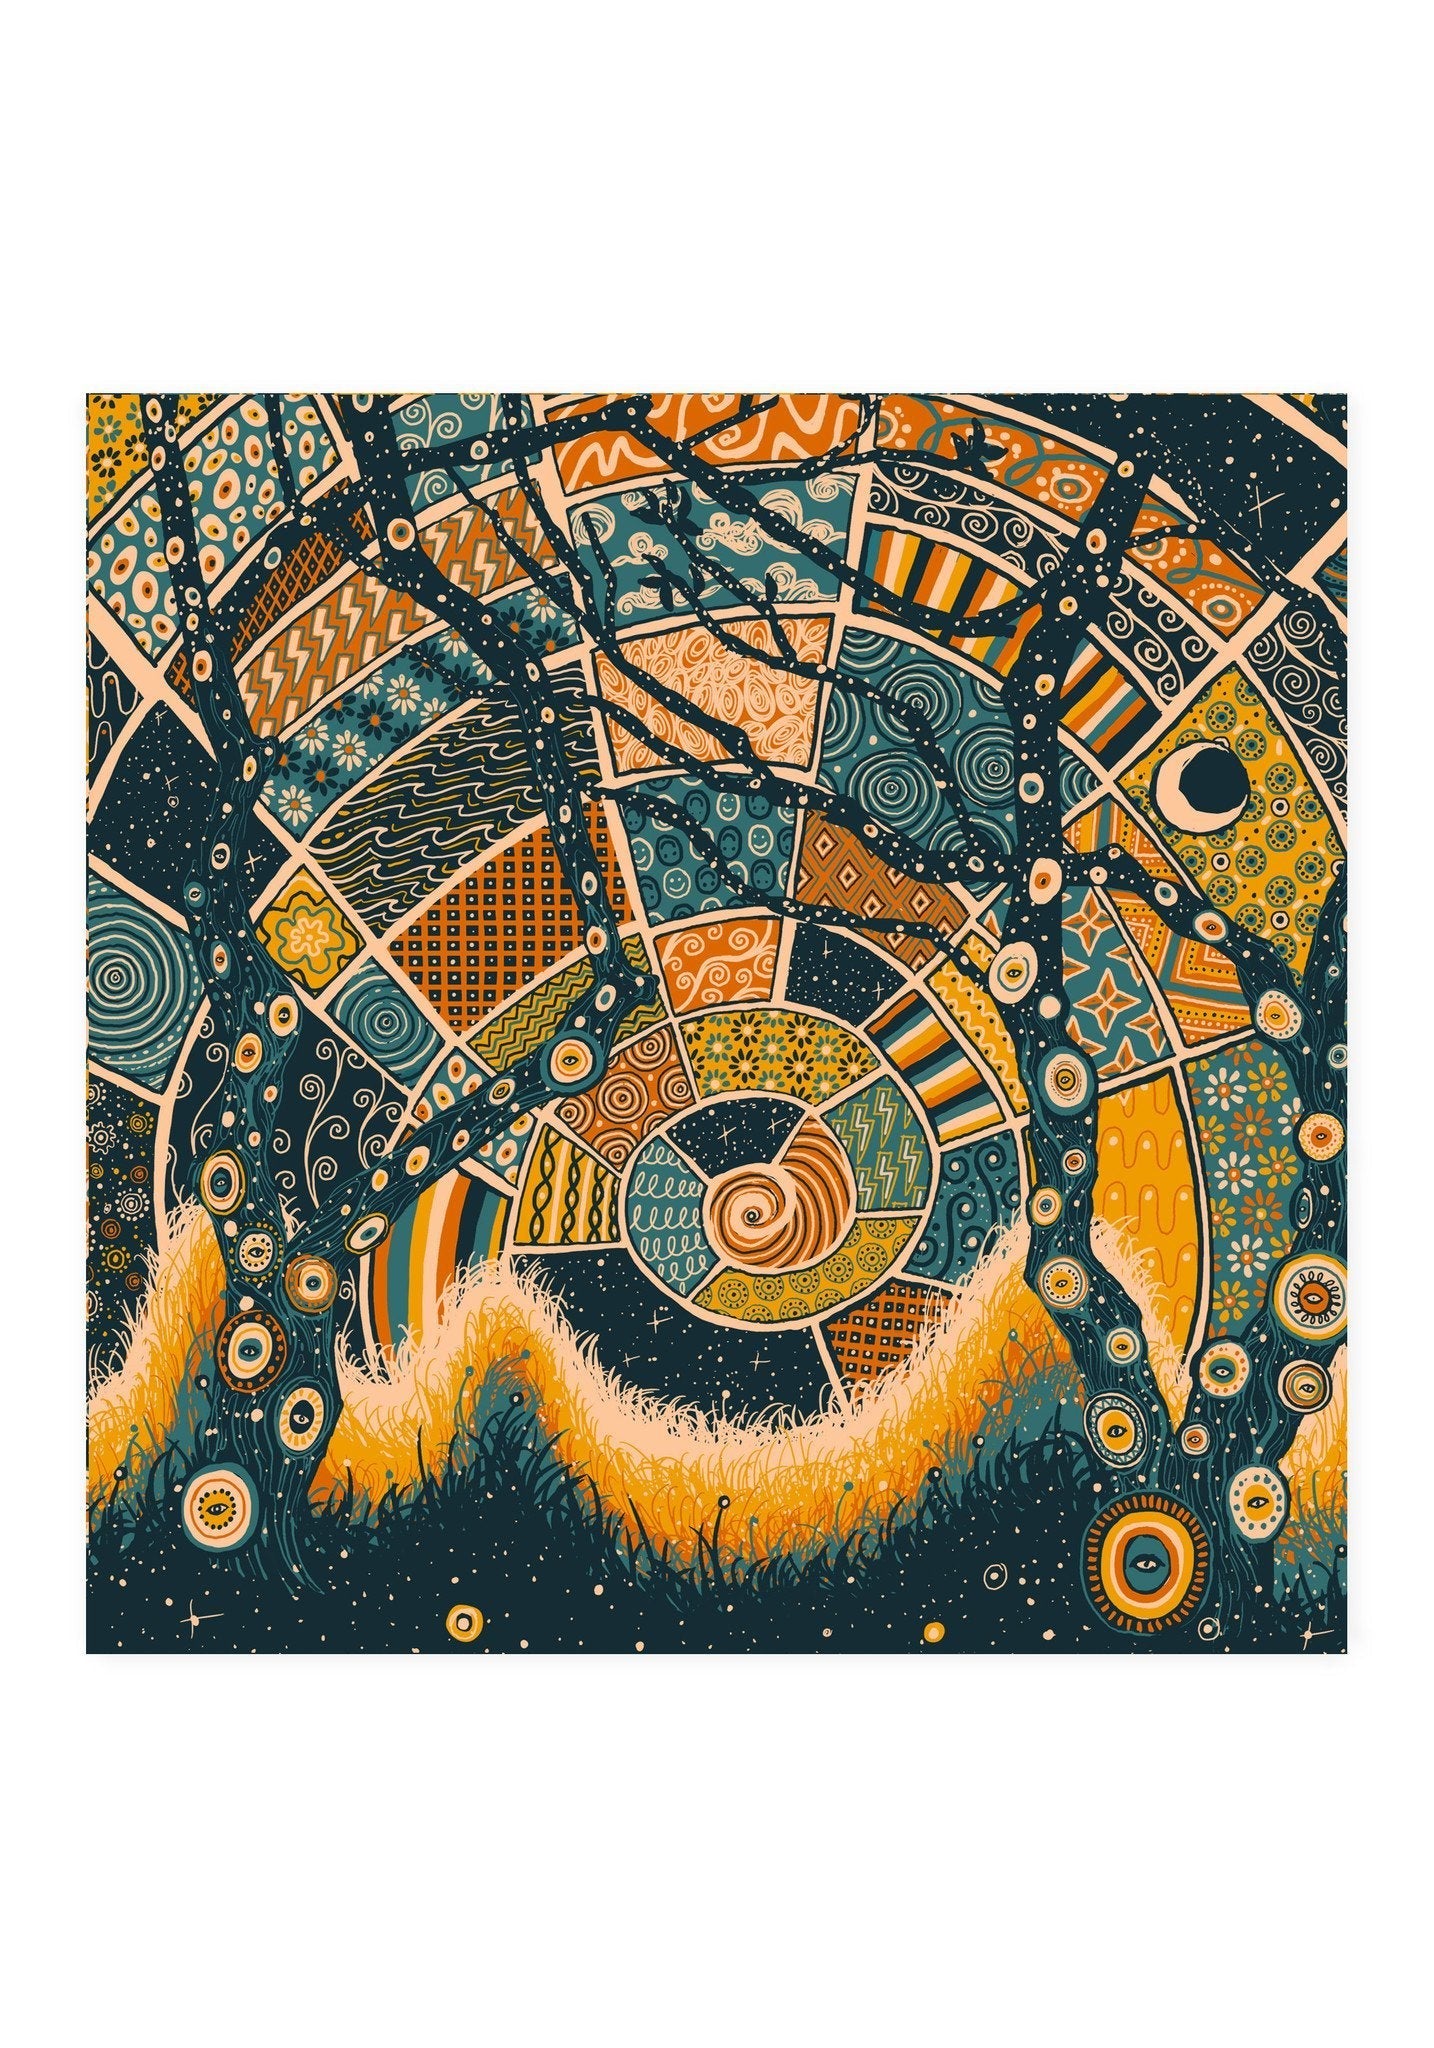 Past Life Regression (Edition of 60) Print James R. Eads